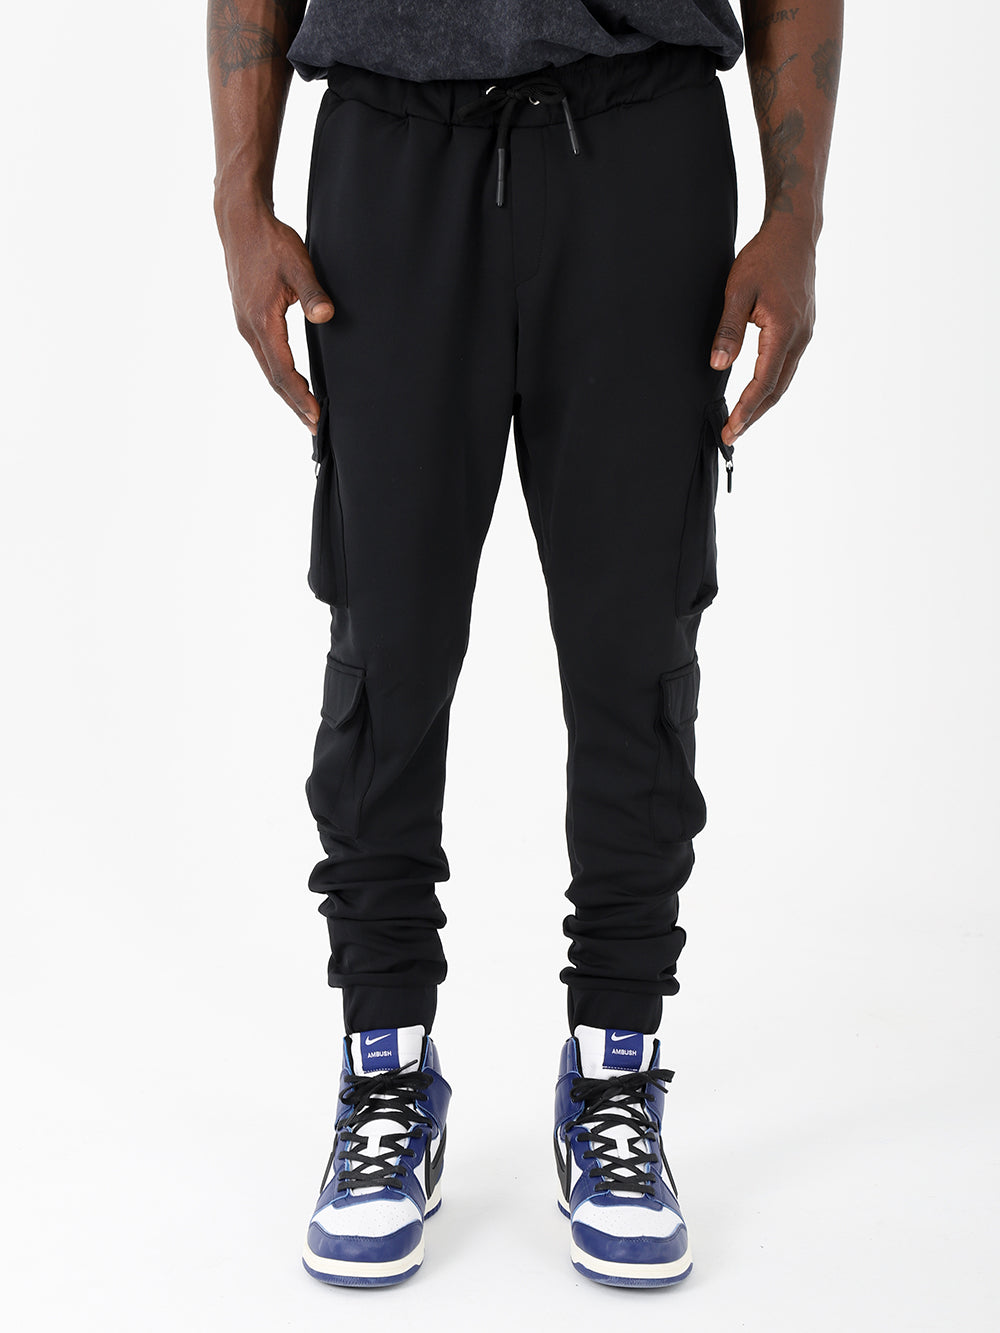 A man wearing VENTURA JOGGERS with adjustable ankle cuffs and sneakers.